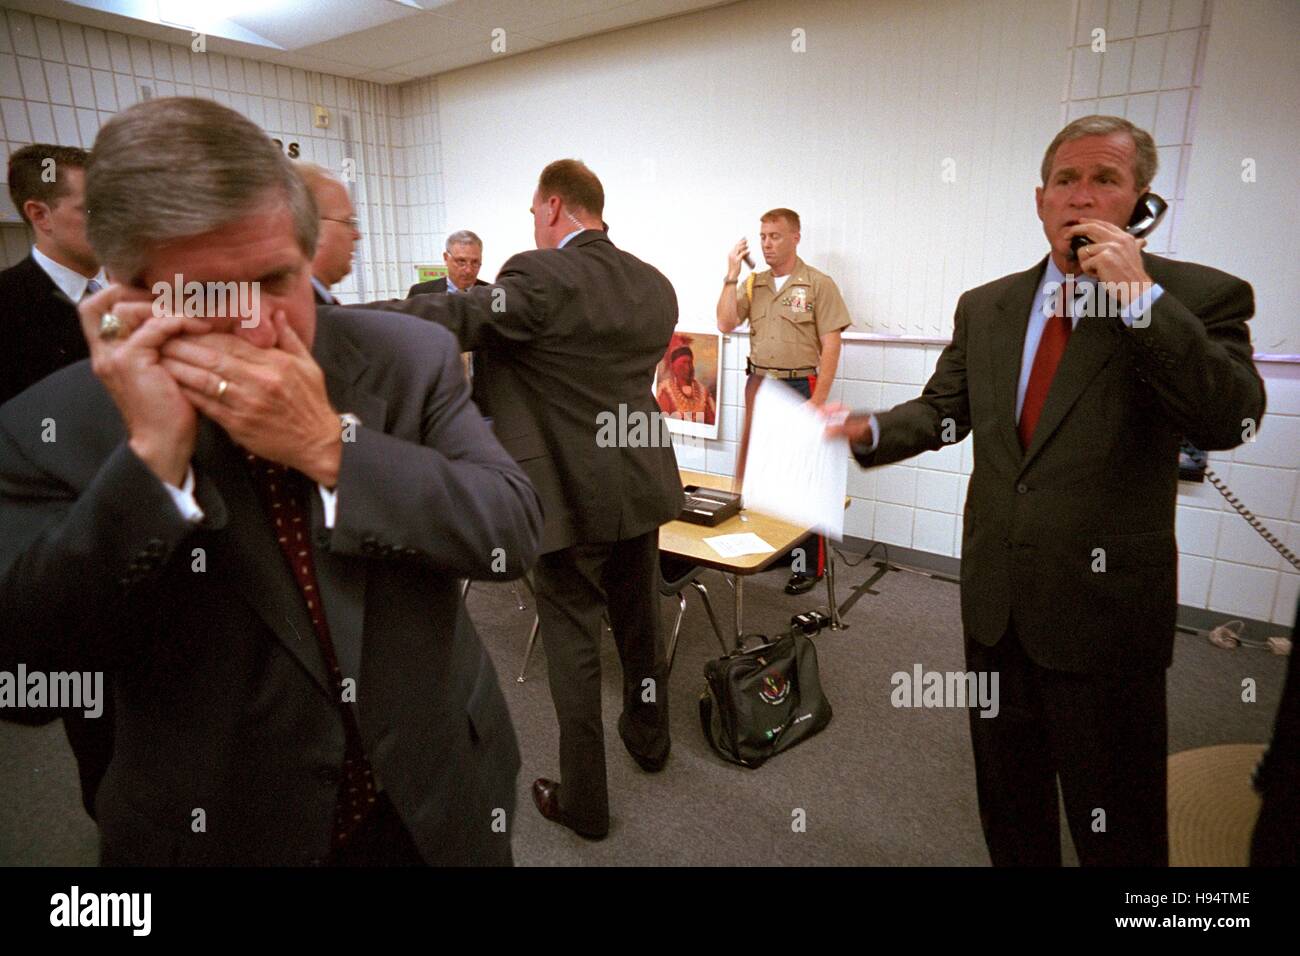 U.S. President George W. Bush and White House Chief of Staff Andy Card make phone calls after hearing news of the September 11 terrorist attacks during a visit to the Emma E. Booker Elementary School September 11, 2001 in Sarasota, Florida. Stock Photo